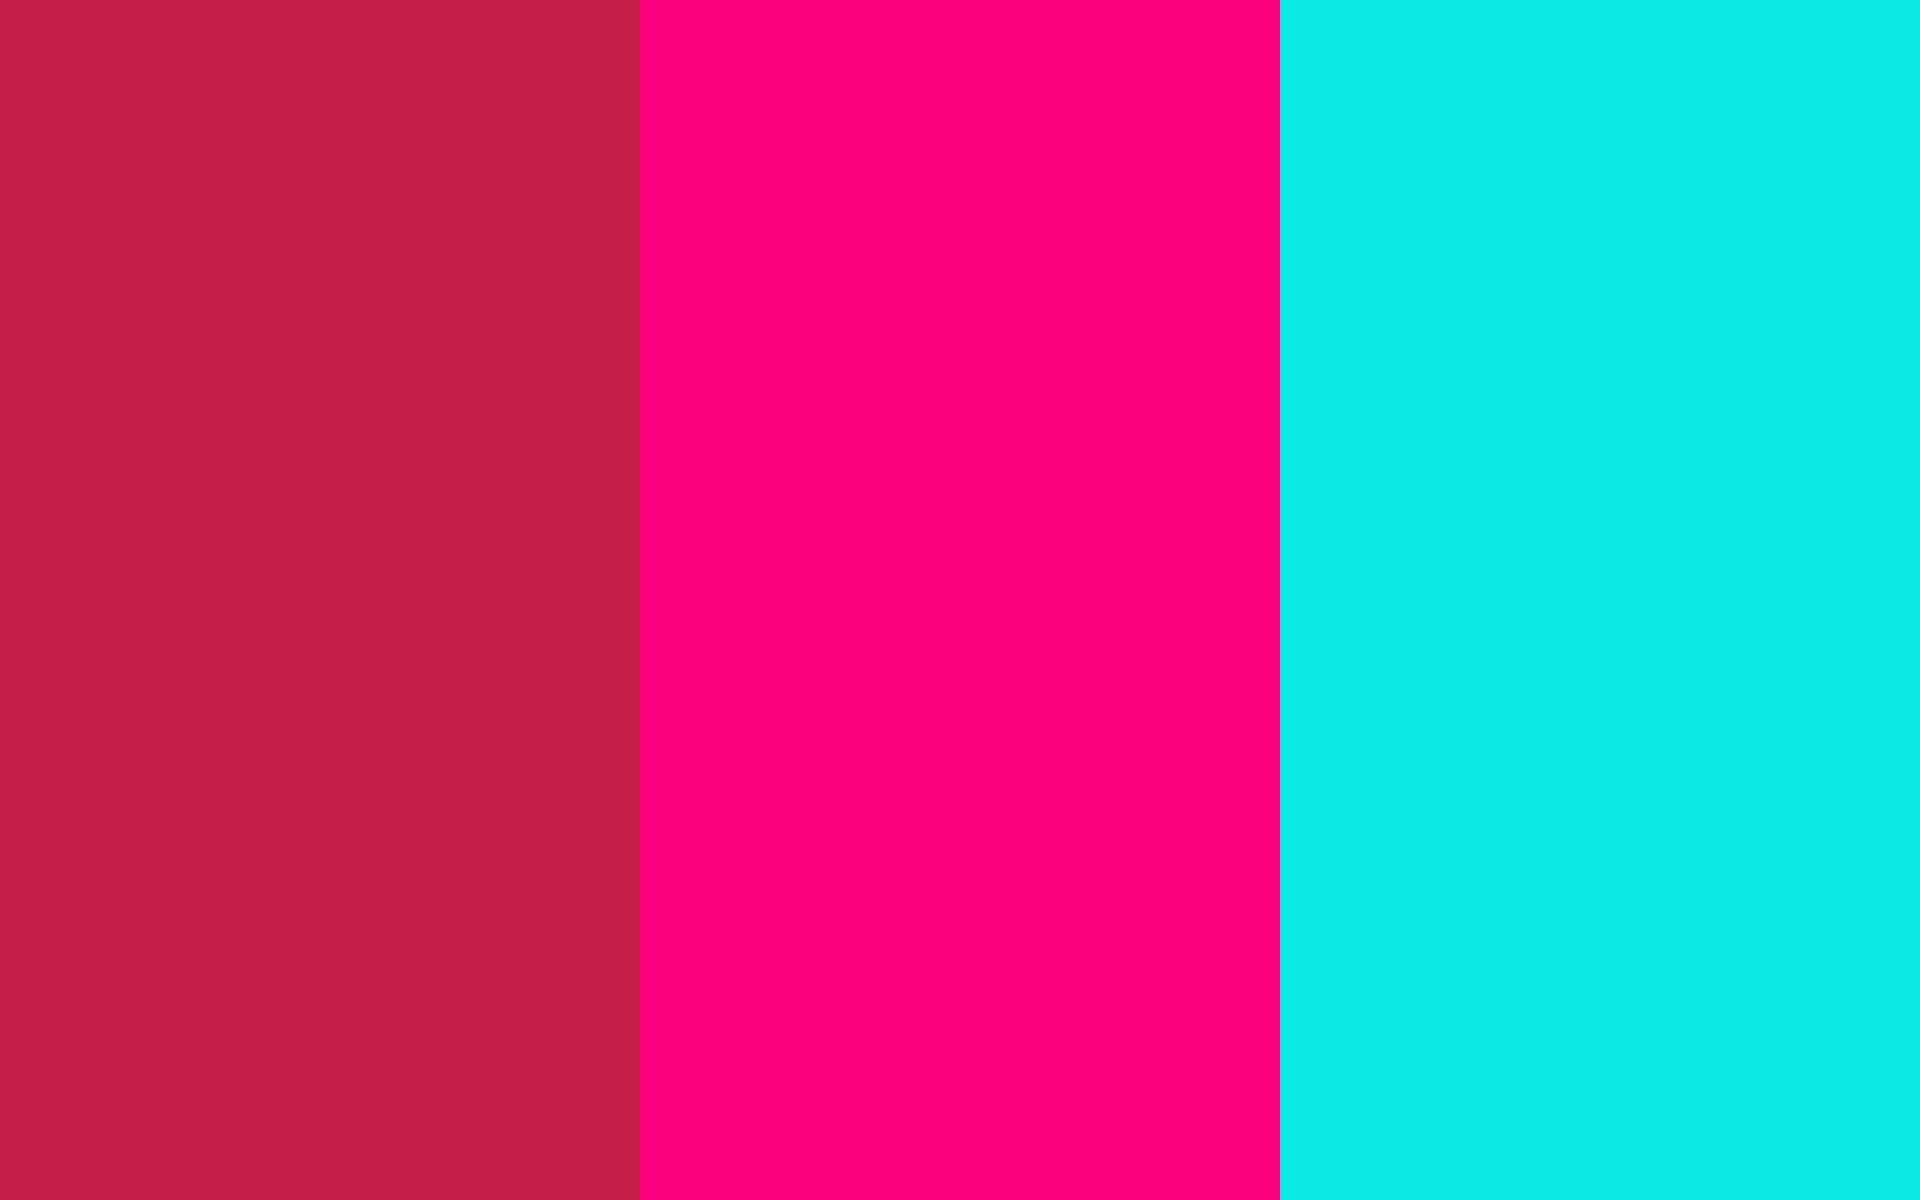 Free download 1920x1200 Bright Maroon Bright Pink and Bright Turquoise Three Color [1920x1200] for your Desktop, Mobile & Tablet. Explore Pink Neon Wallpaper. Neon Wallpaper, Neon Animal Wallpaper, Cute Neon Wallpaper